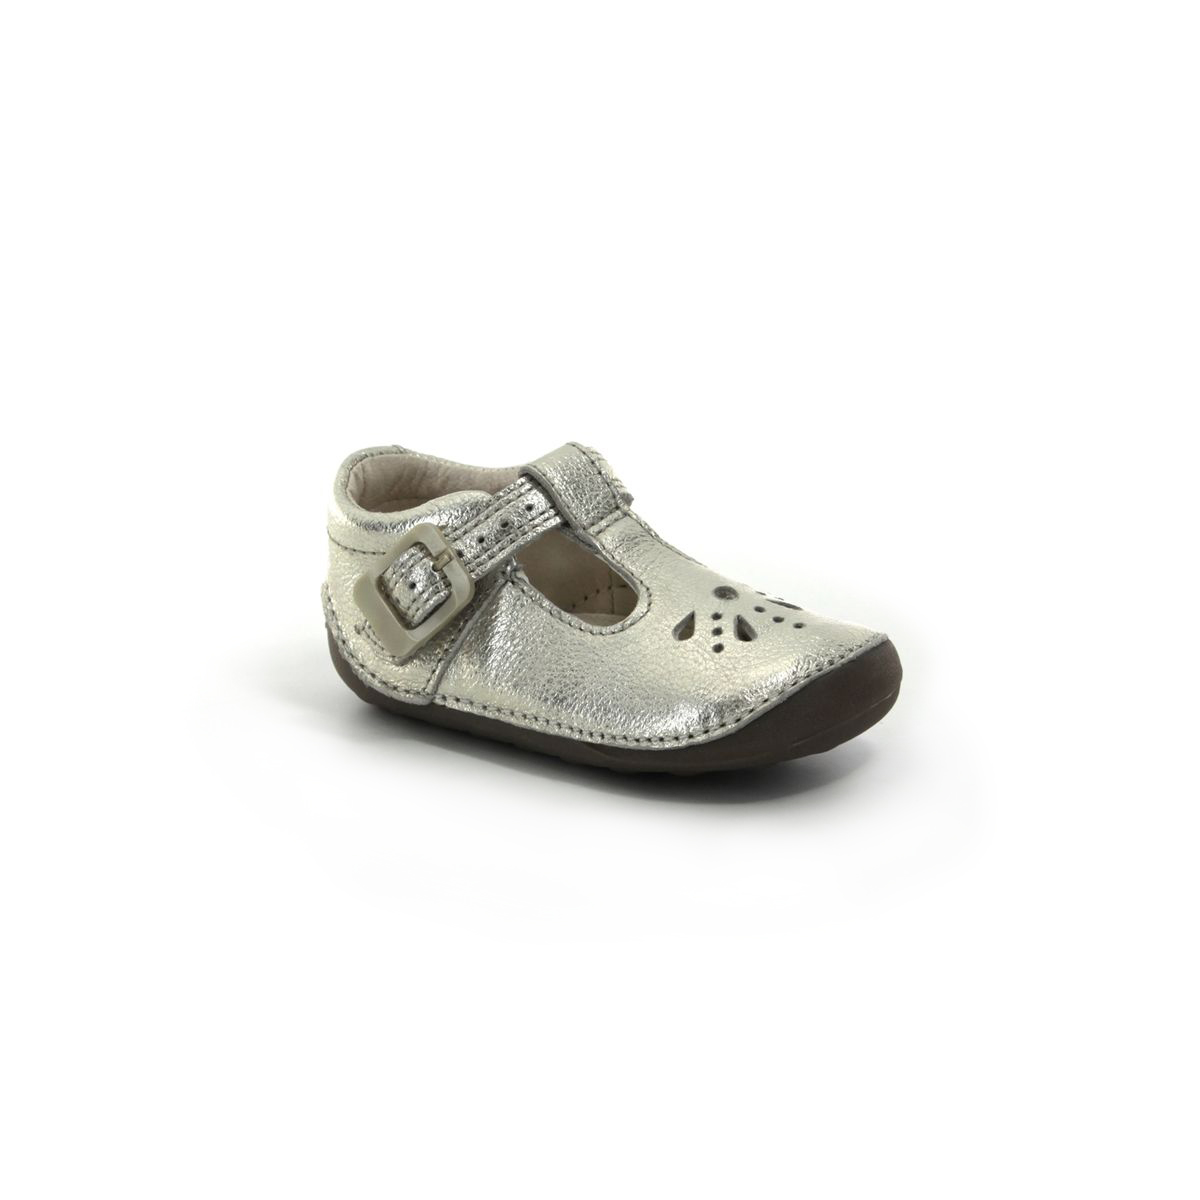 clarks baby shoes fitting